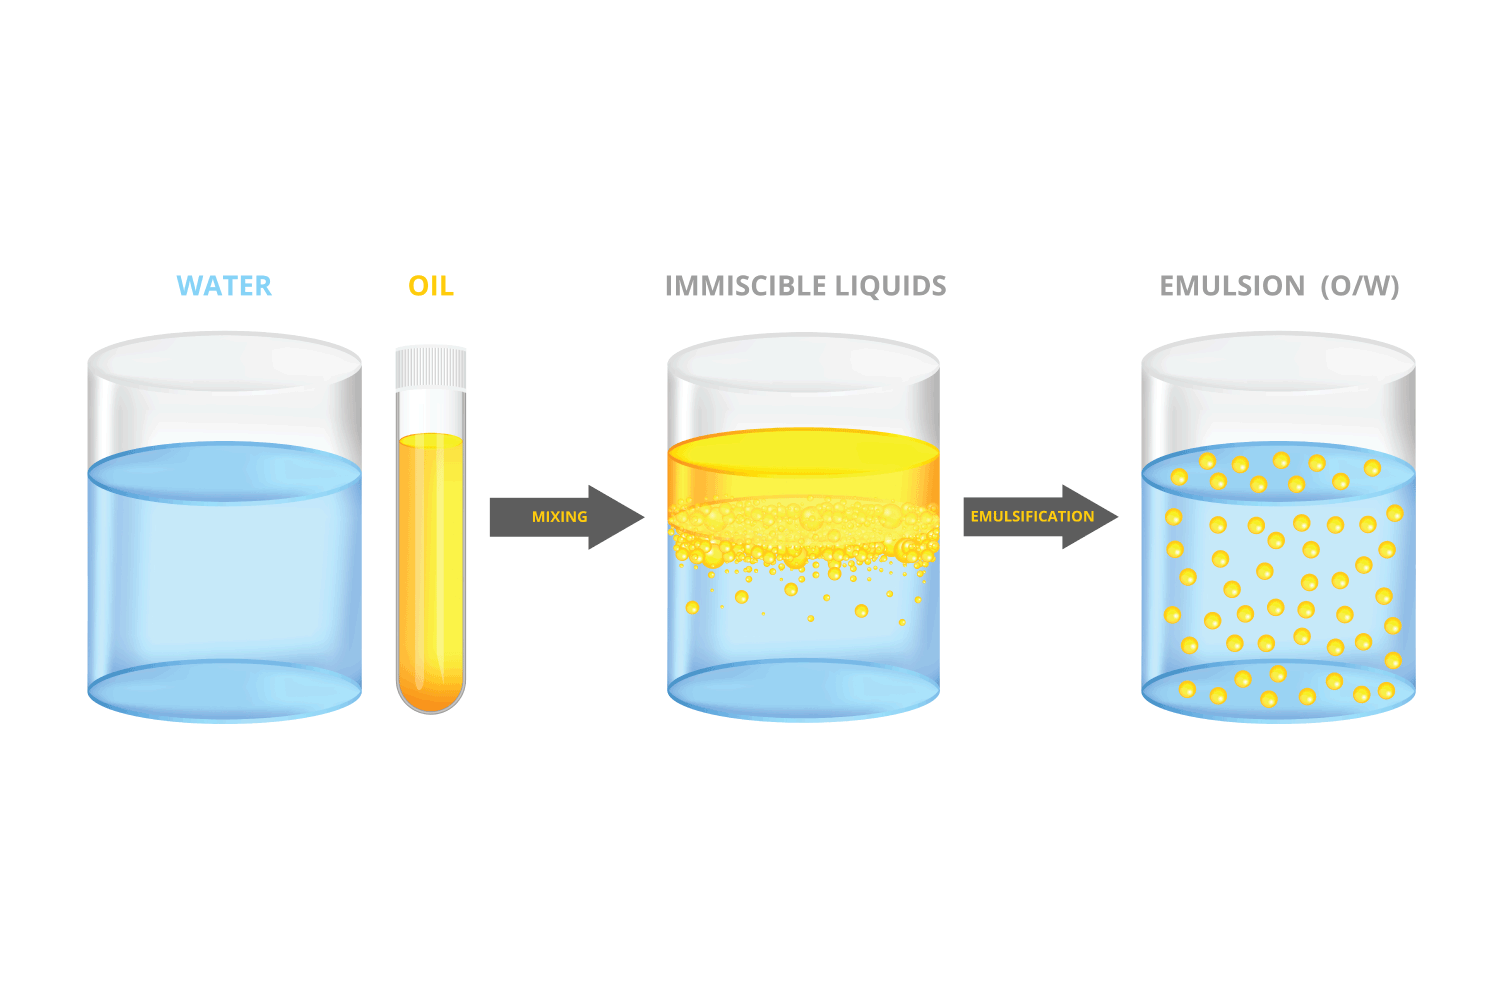 scientific illustration. Immiscible liquids water and oil mixed together, a stable dispersion. Oil in a test tube, and water in a beaker.